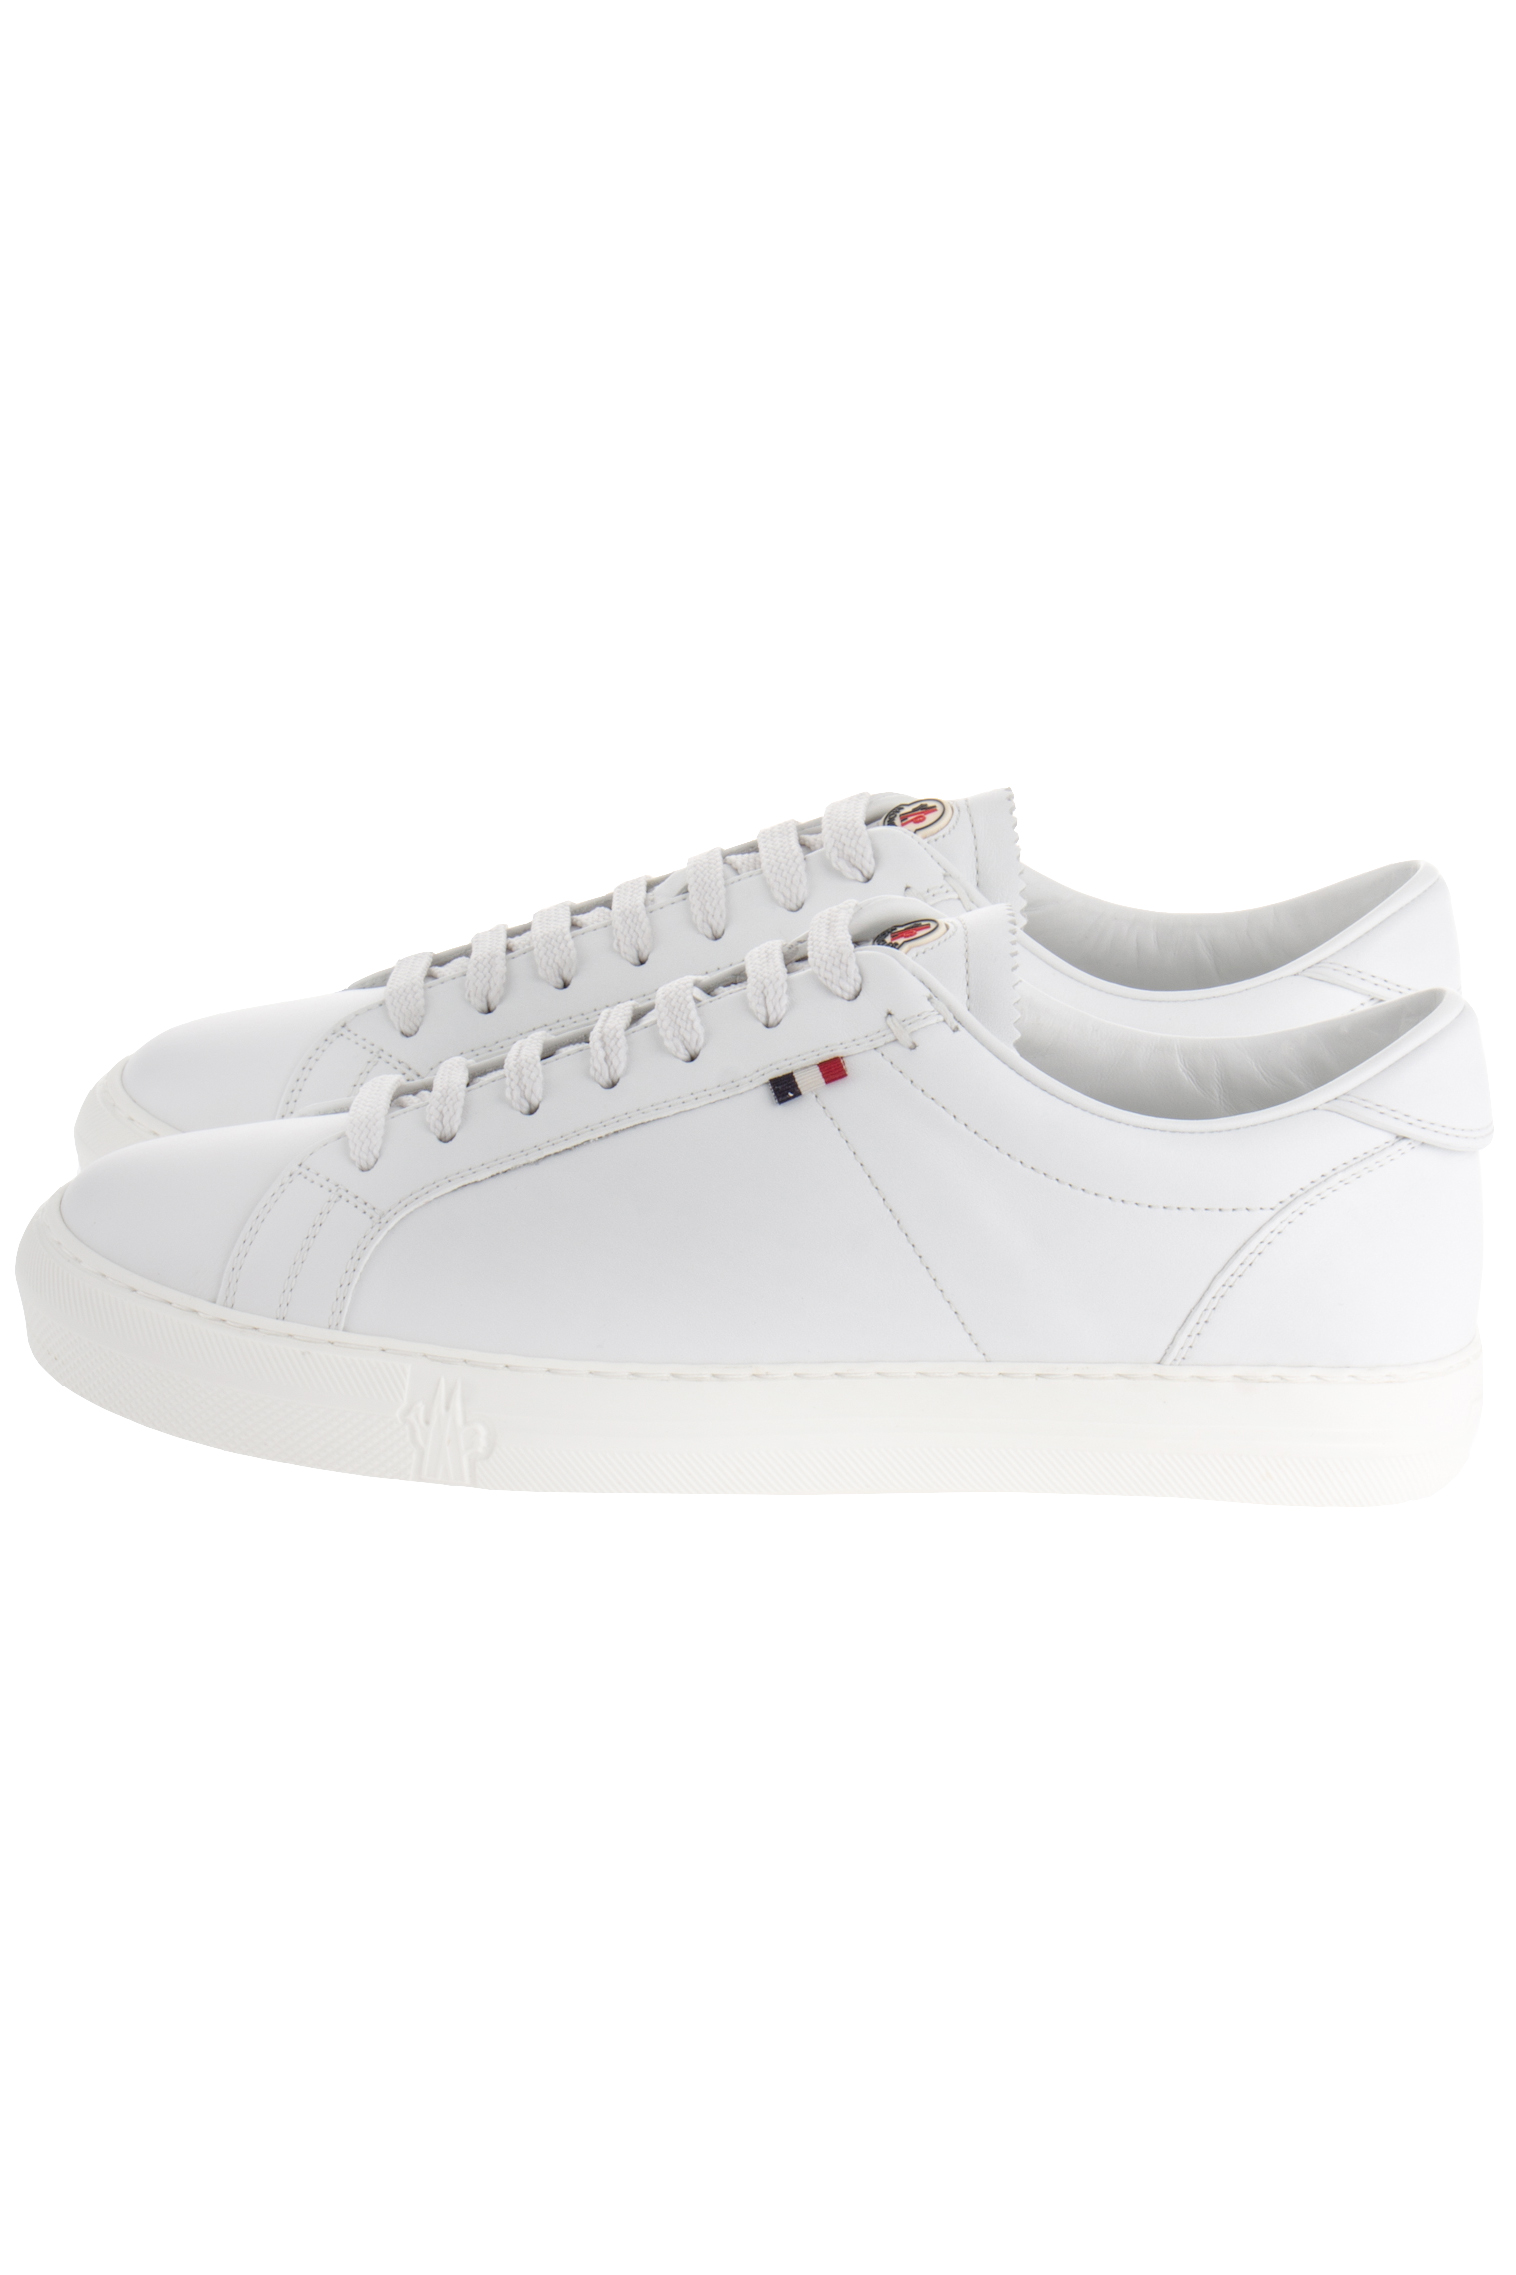 Moncler New Monaco Low Top Trainers | 4M714 40 02SSC 002 White | Aphro